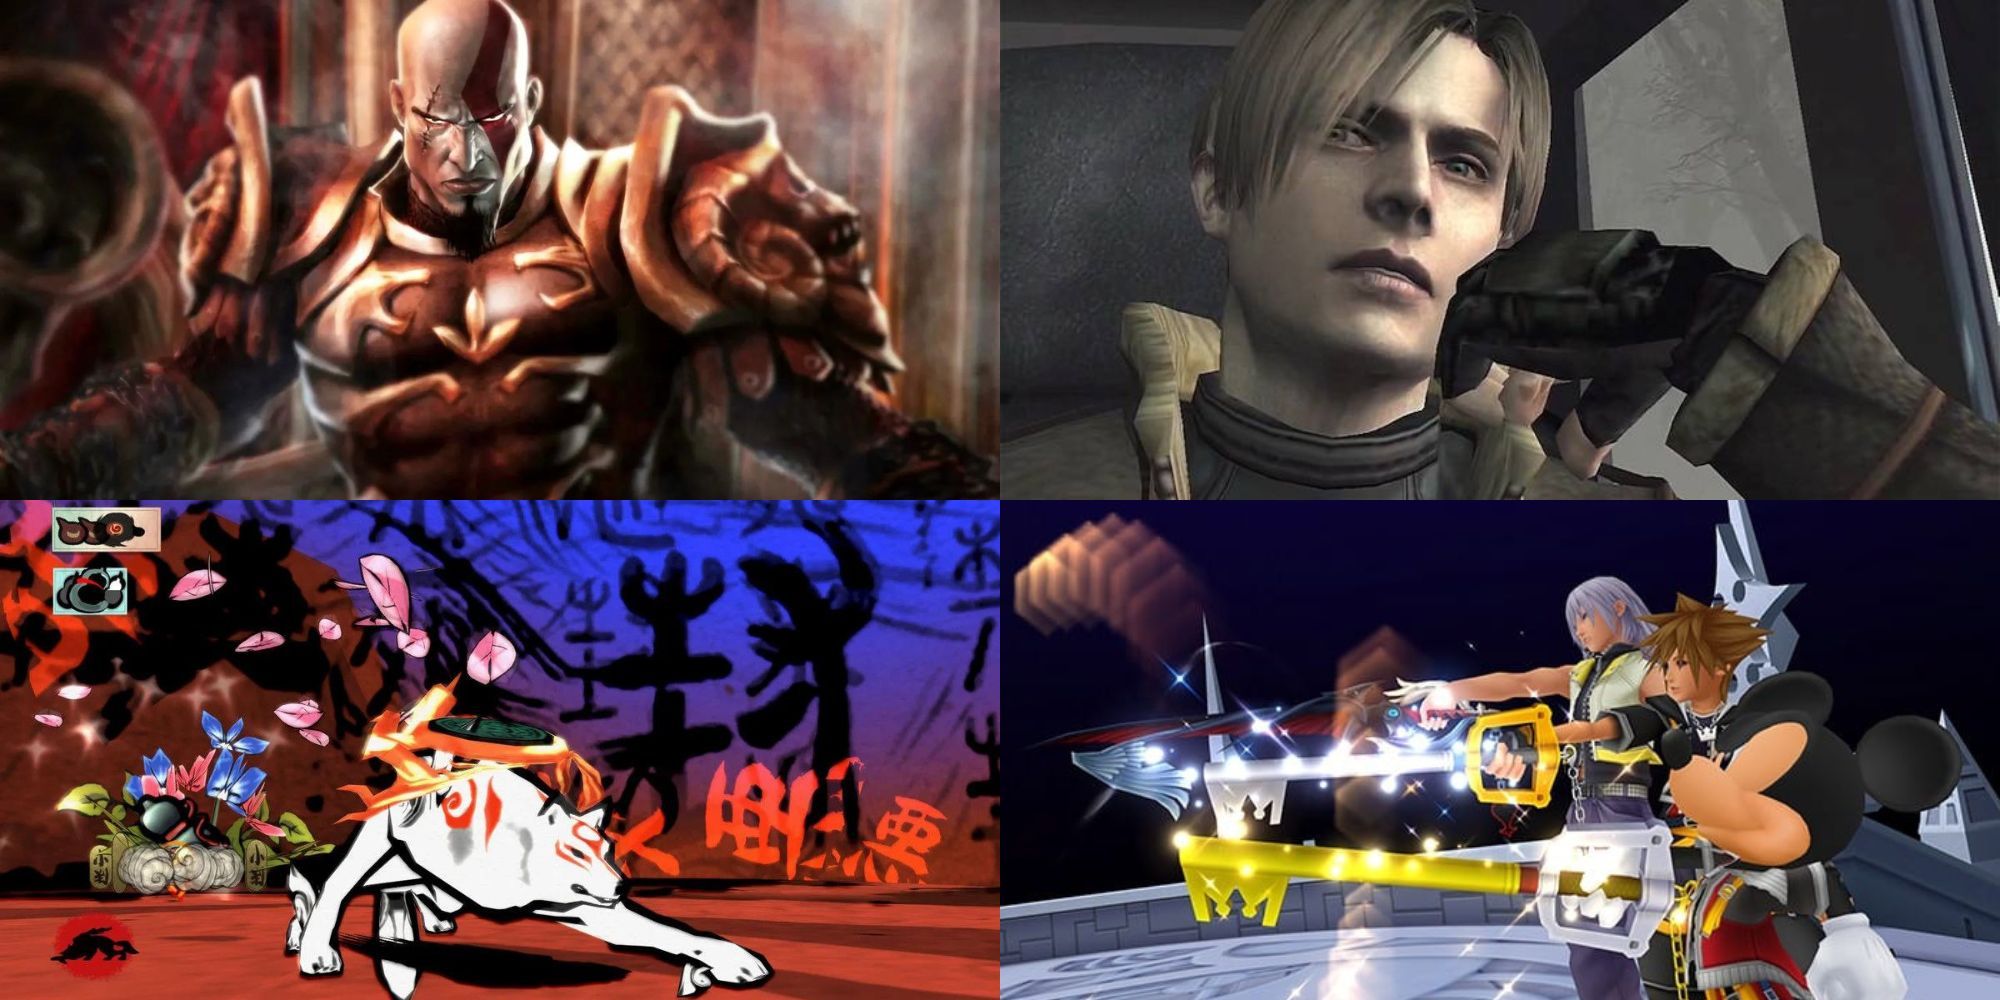 A collage of 4 innovative PS2 Games: God of War 2, Resident Evil 4, Okami and Kingdom Hearts 2.